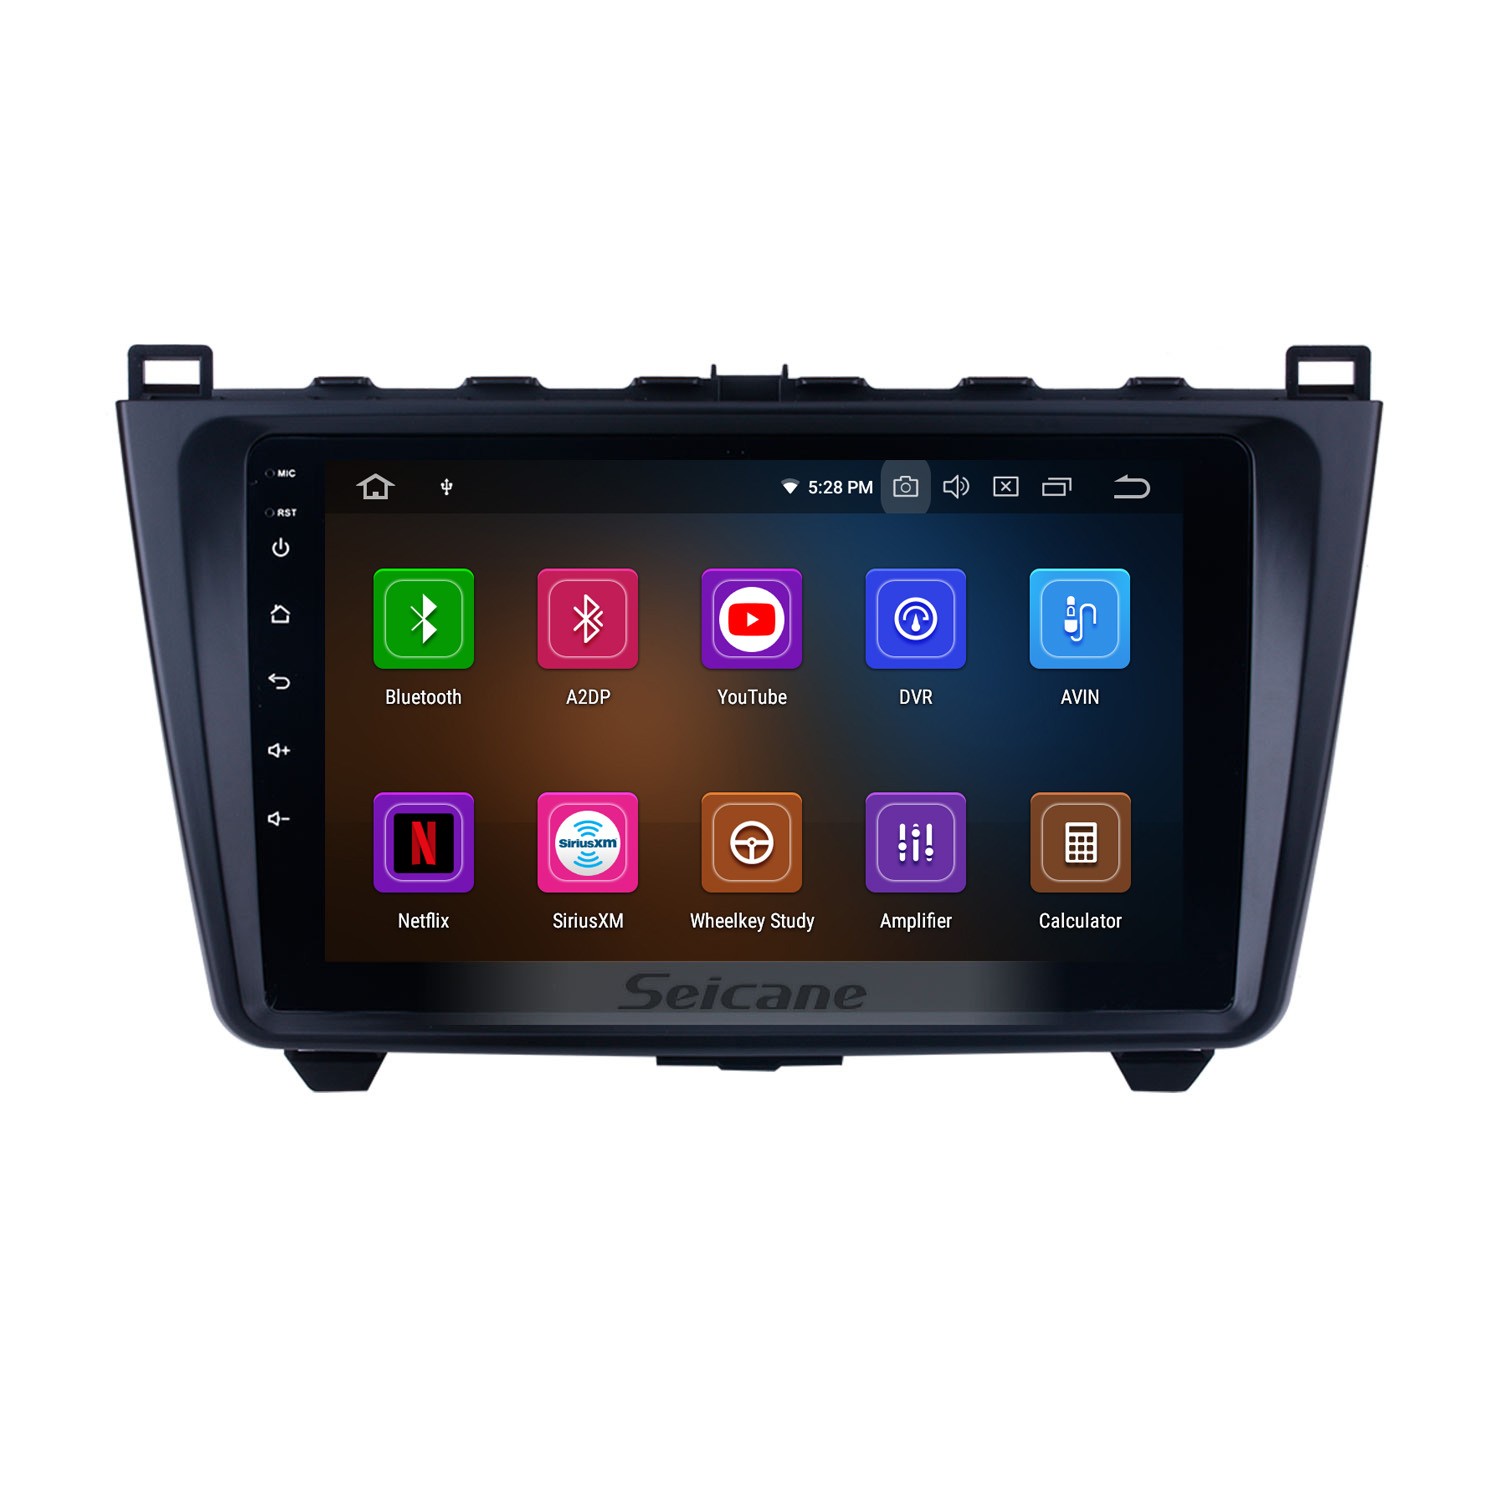 OBD2 6 Rearview Rui wing with Touchscreen 13.0 camera Android 1024*600 link Mirror full for Bluetooth Mazda Radio carplay 2008-2015 System TPMS 9 GPS inch TV Navigation DVR